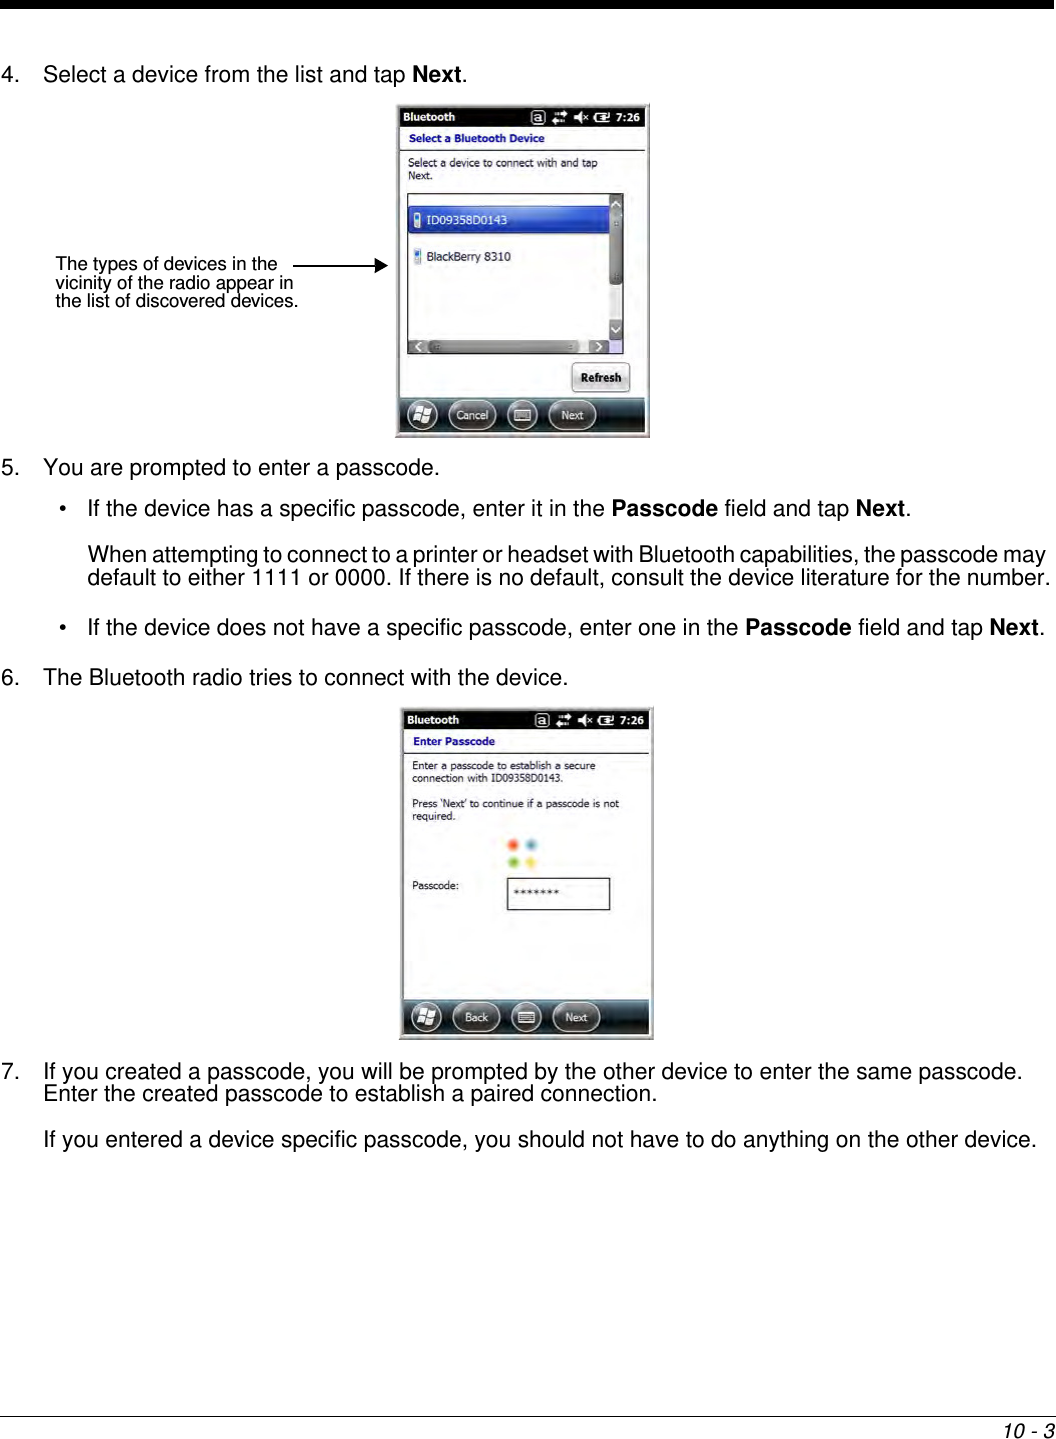 10 - 34. Select a device from the list and tap Next. 5. You are prompted to enter a passcode.• If the device has a specific passcode, enter it in the Passcode field and tap Next.When attempting to connect to a printer or headset with Bluetooth capabilities, the passcode may default to either 1111 or 0000. If there is no default, consult the device literature for the number.• If the device does not have a specific passcode, enter one in the Passcode field and tap Next.6. The Bluetooth radio tries to connect with the device.7. If you created a passcode, you will be prompted by the other device to enter the same passcode. Enter the created passcode to establish a paired connection. If you entered a device specific passcode, you should not have to do anything on the other device. The types of devices in the vicinity of the radio appear in the list of discovered devices.